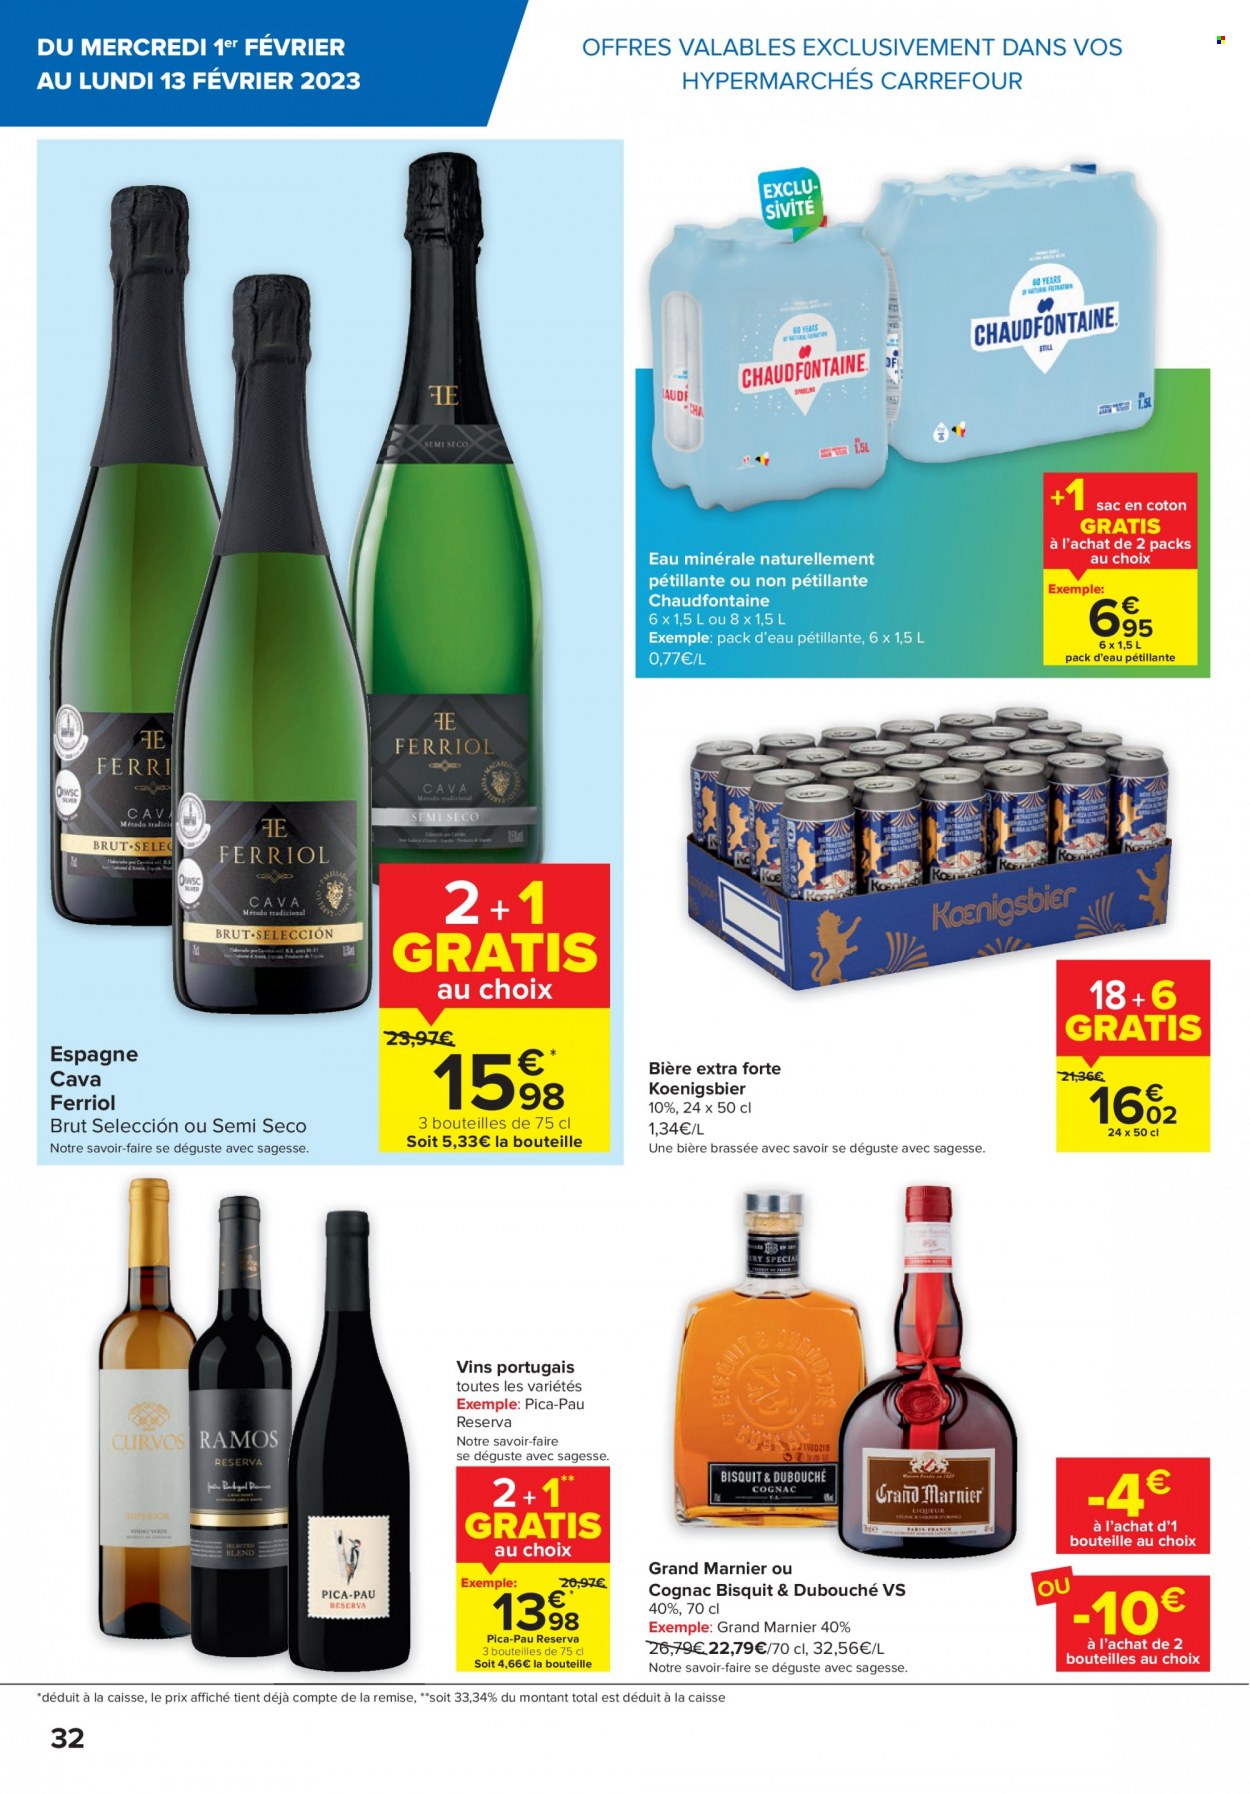 Catalogue Carrefour hypermarkt - 1.2.2023 - 13.2.2023. Page 32.